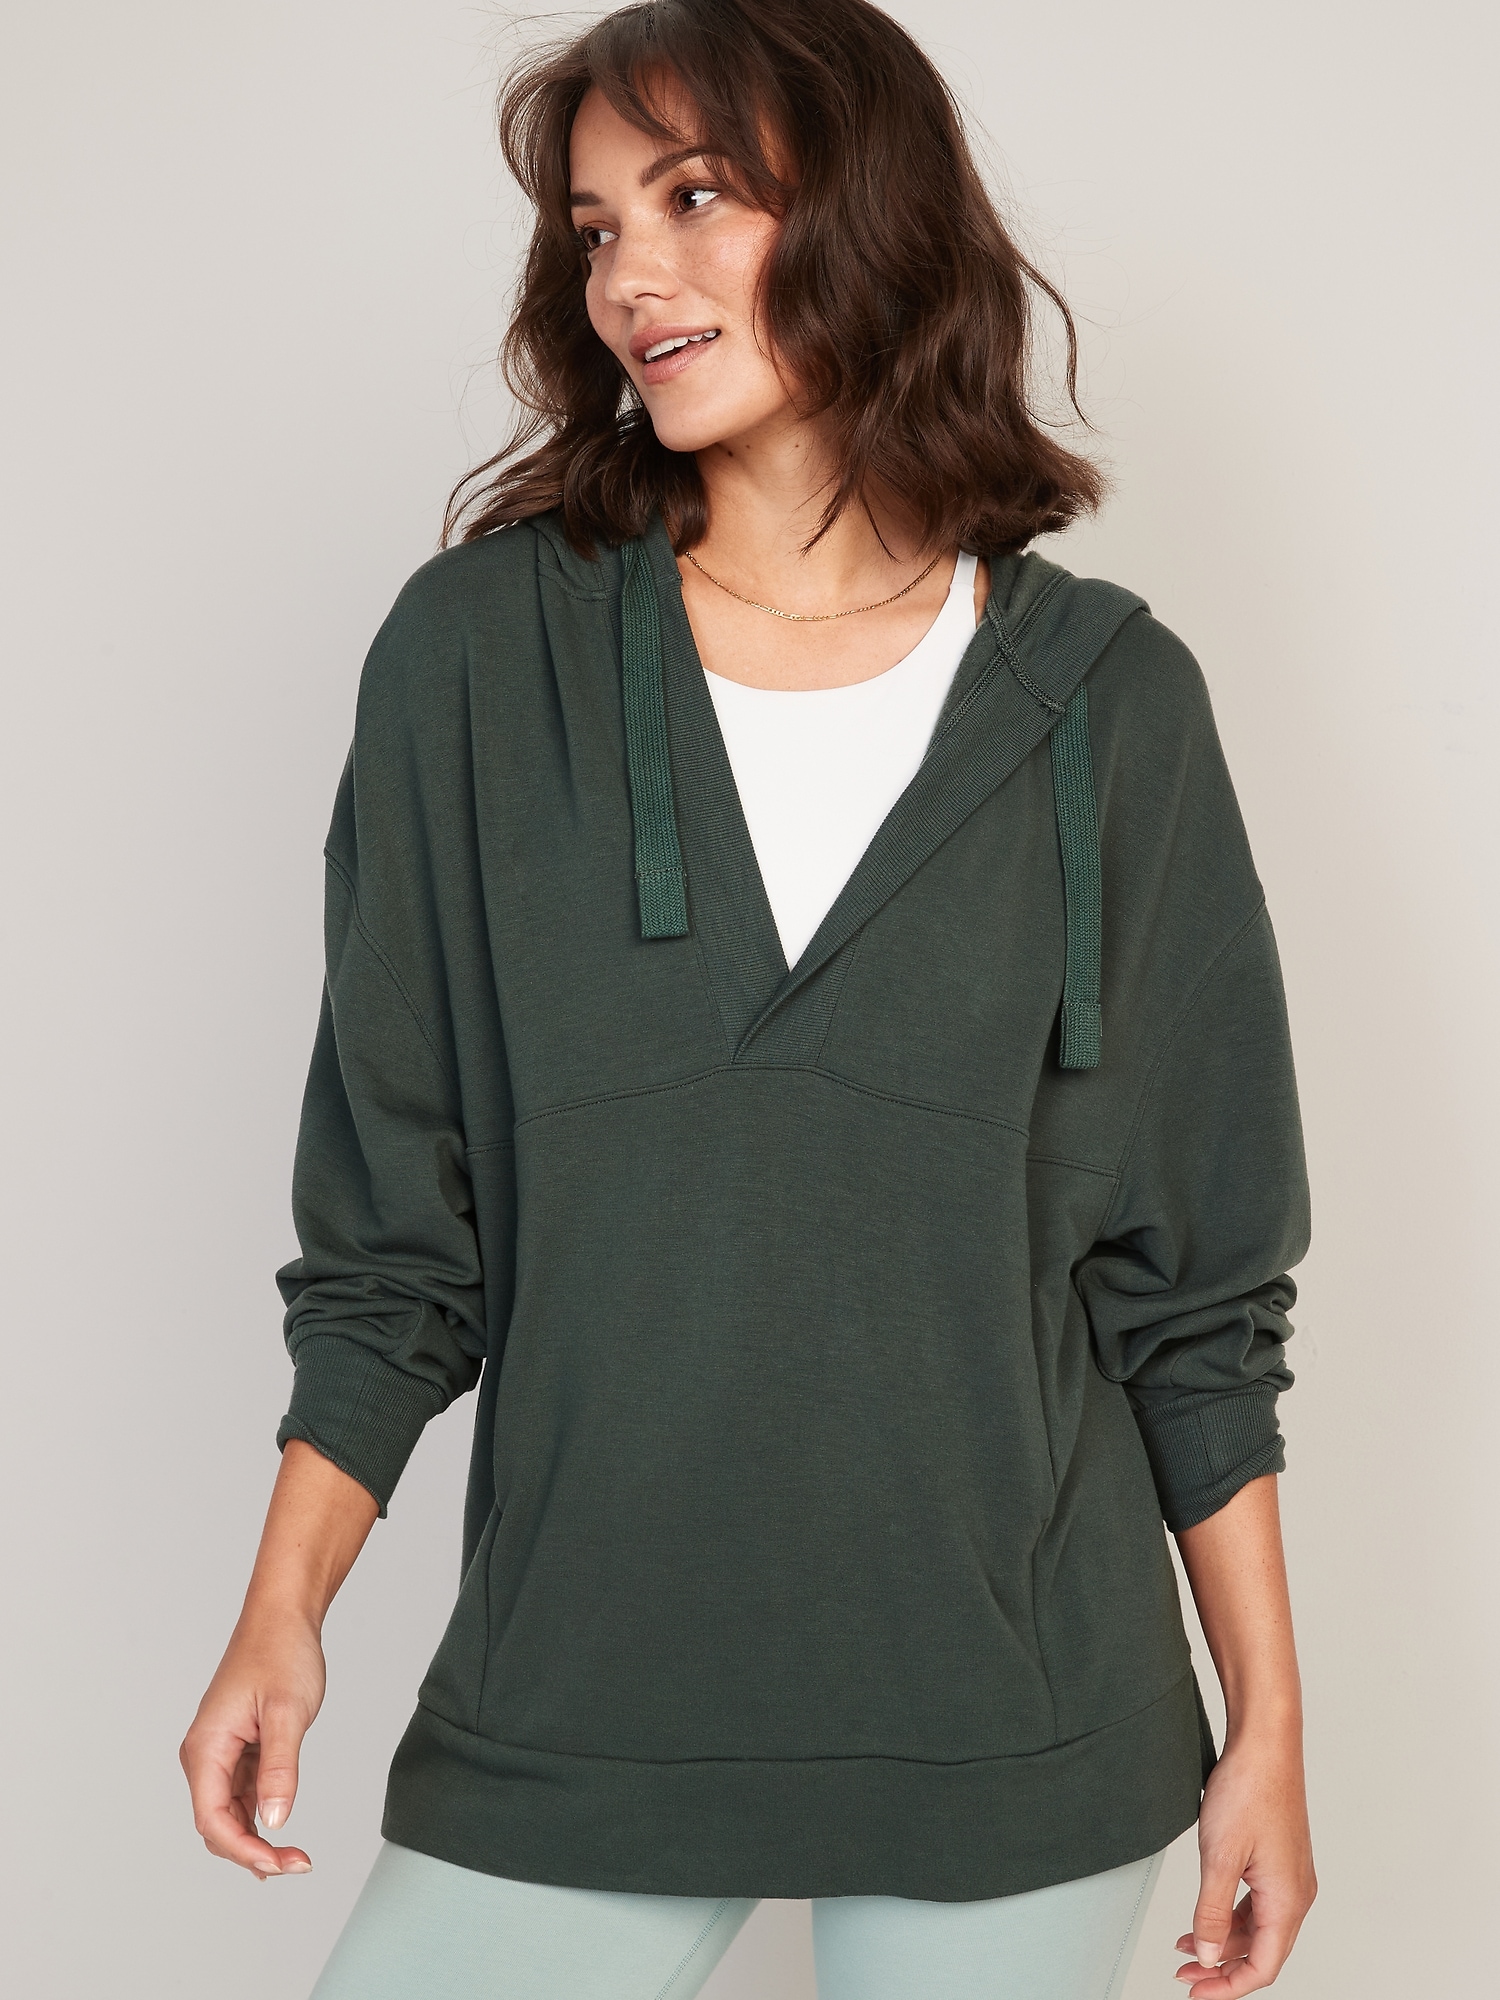 Old Navy Live-In Cozy-Knit French-Terry Tunic Hoodie for Women green. 1